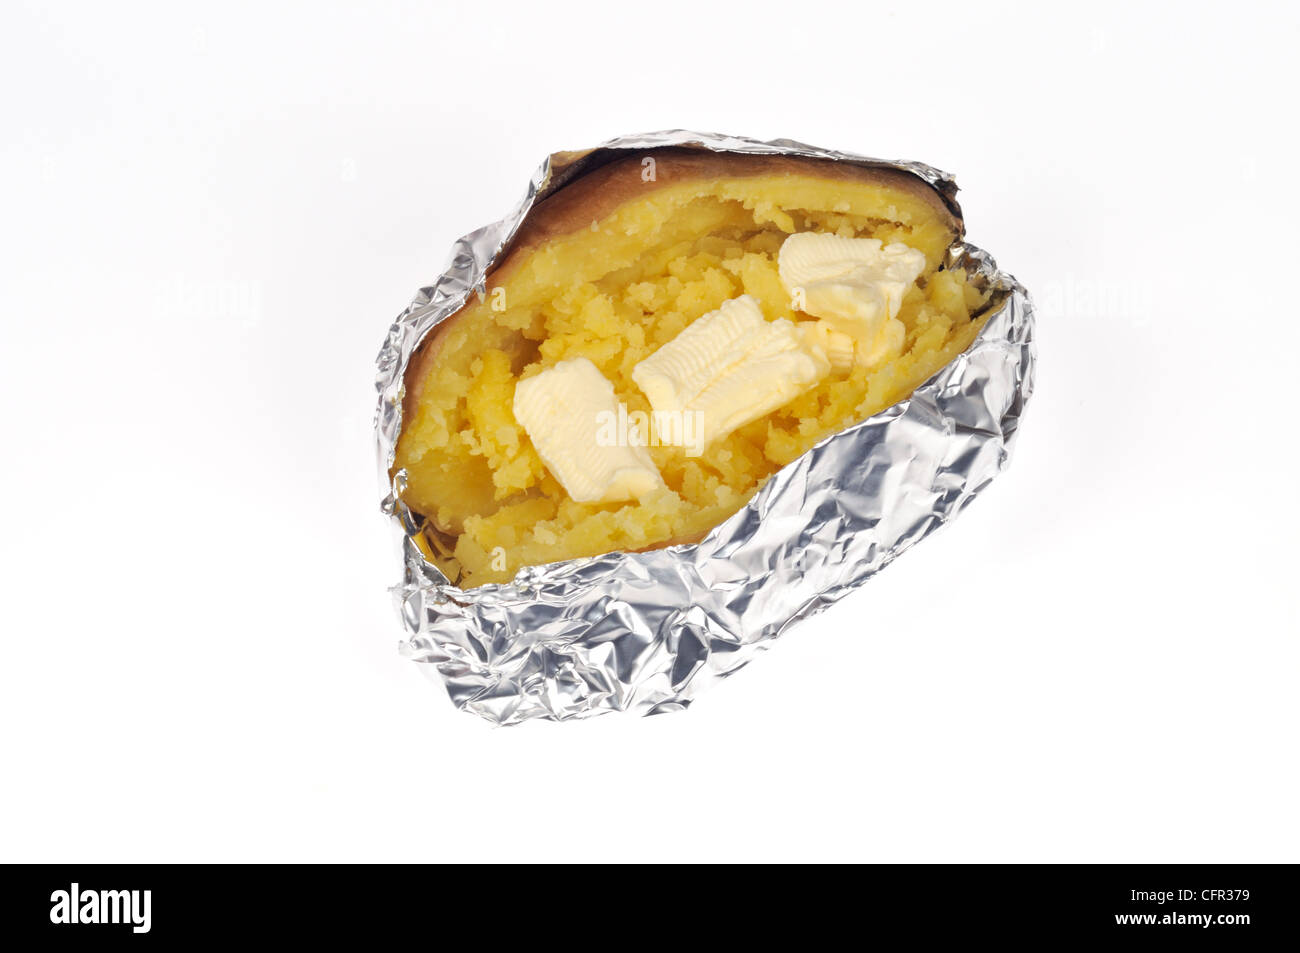 Cooked baked jacket yukon gold potato cut in half with melting butter wrapped in tin foil on white background cut out Stock Photo